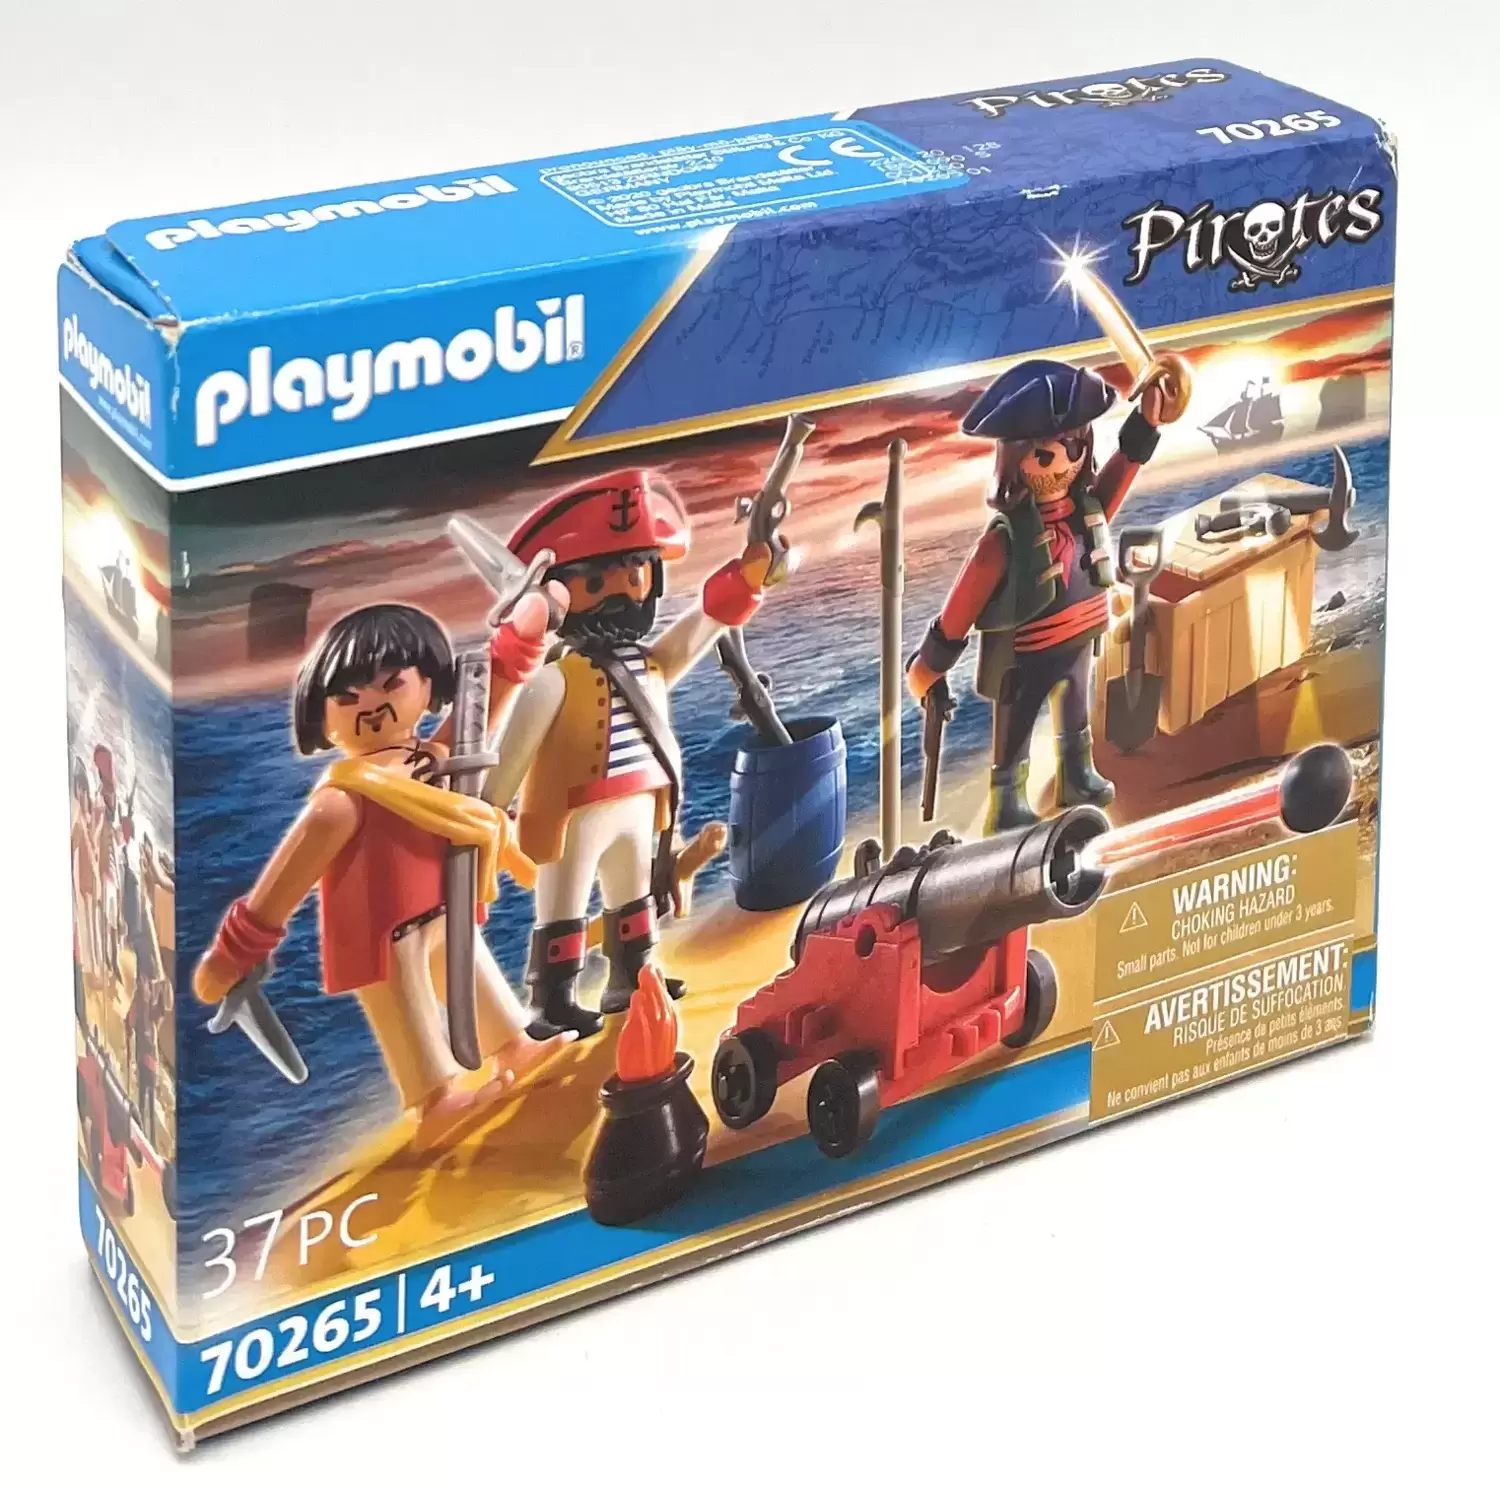 Playmobil Pirate Keychain - Do not lose your keys